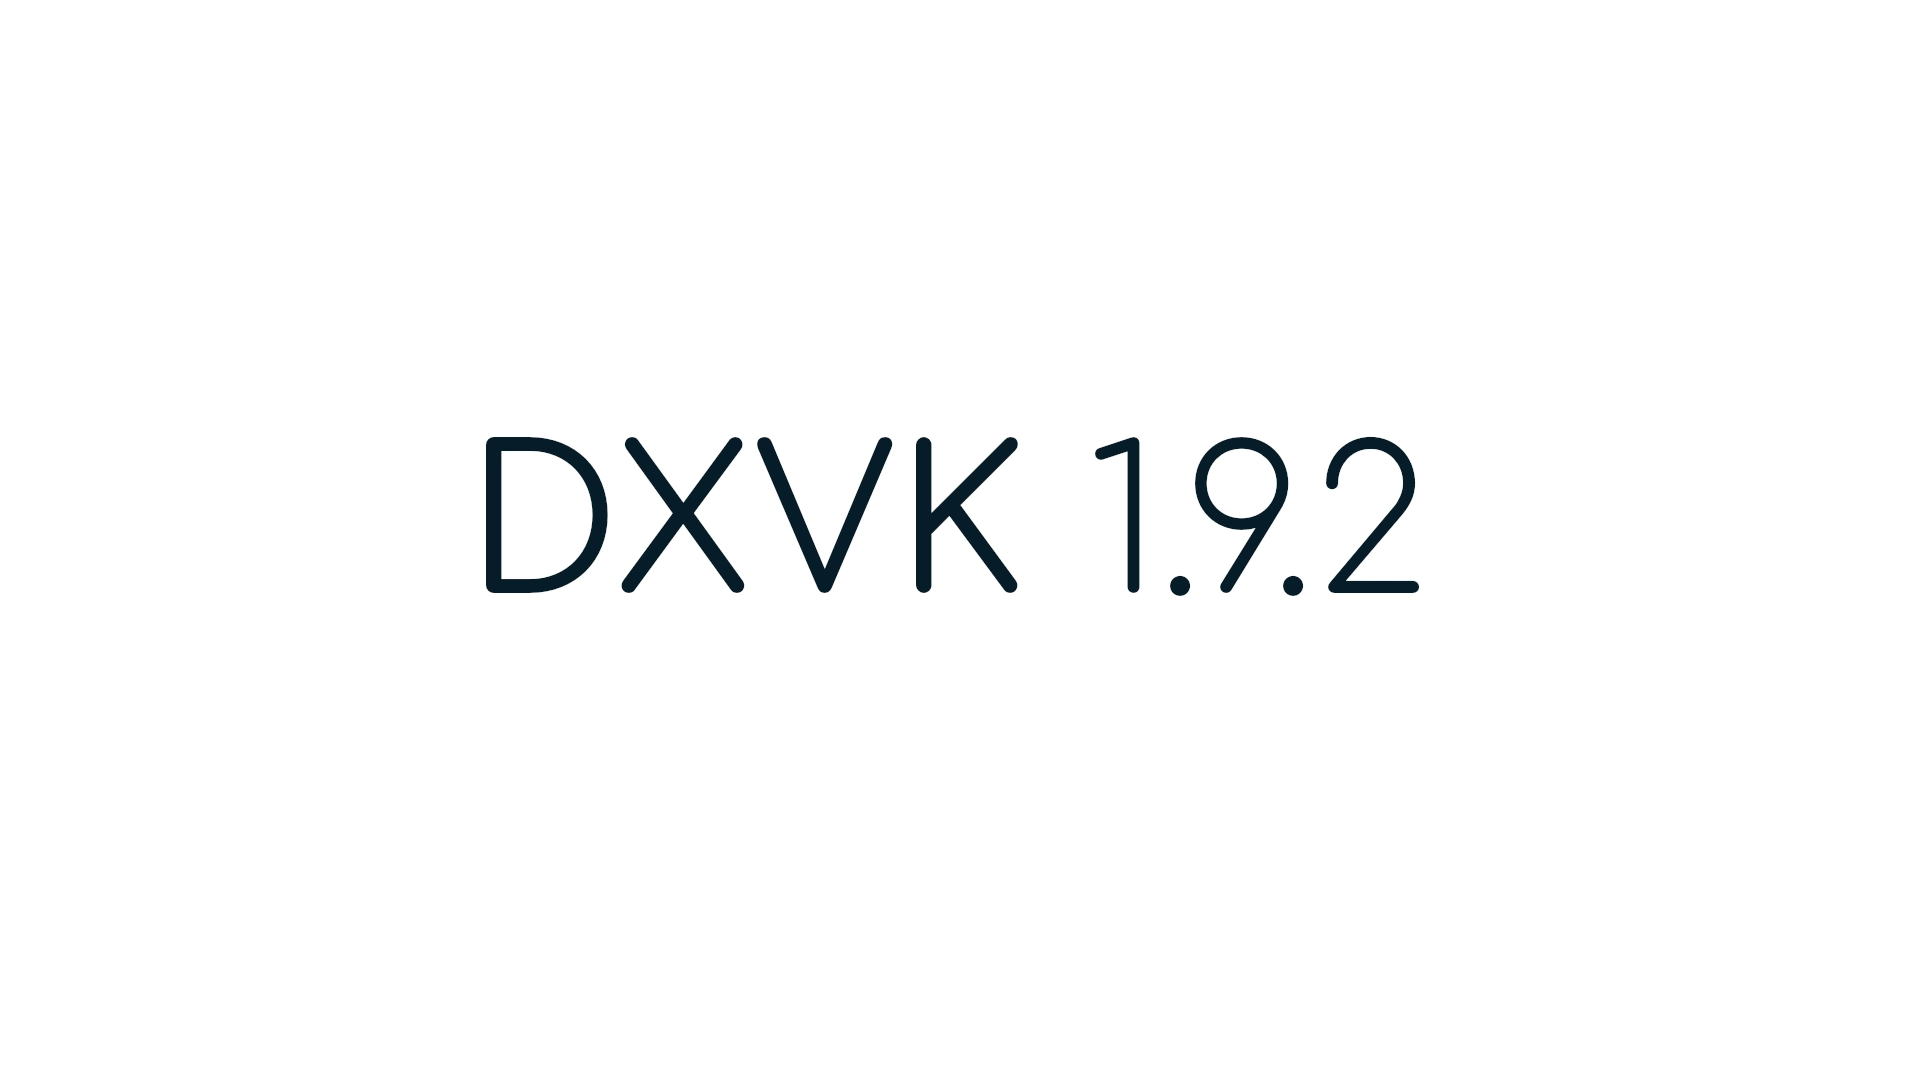 DXVK 1.9.2 Improves Pathfinder: Wrath of the Righteous, Need For Speed Heat, and Other Games